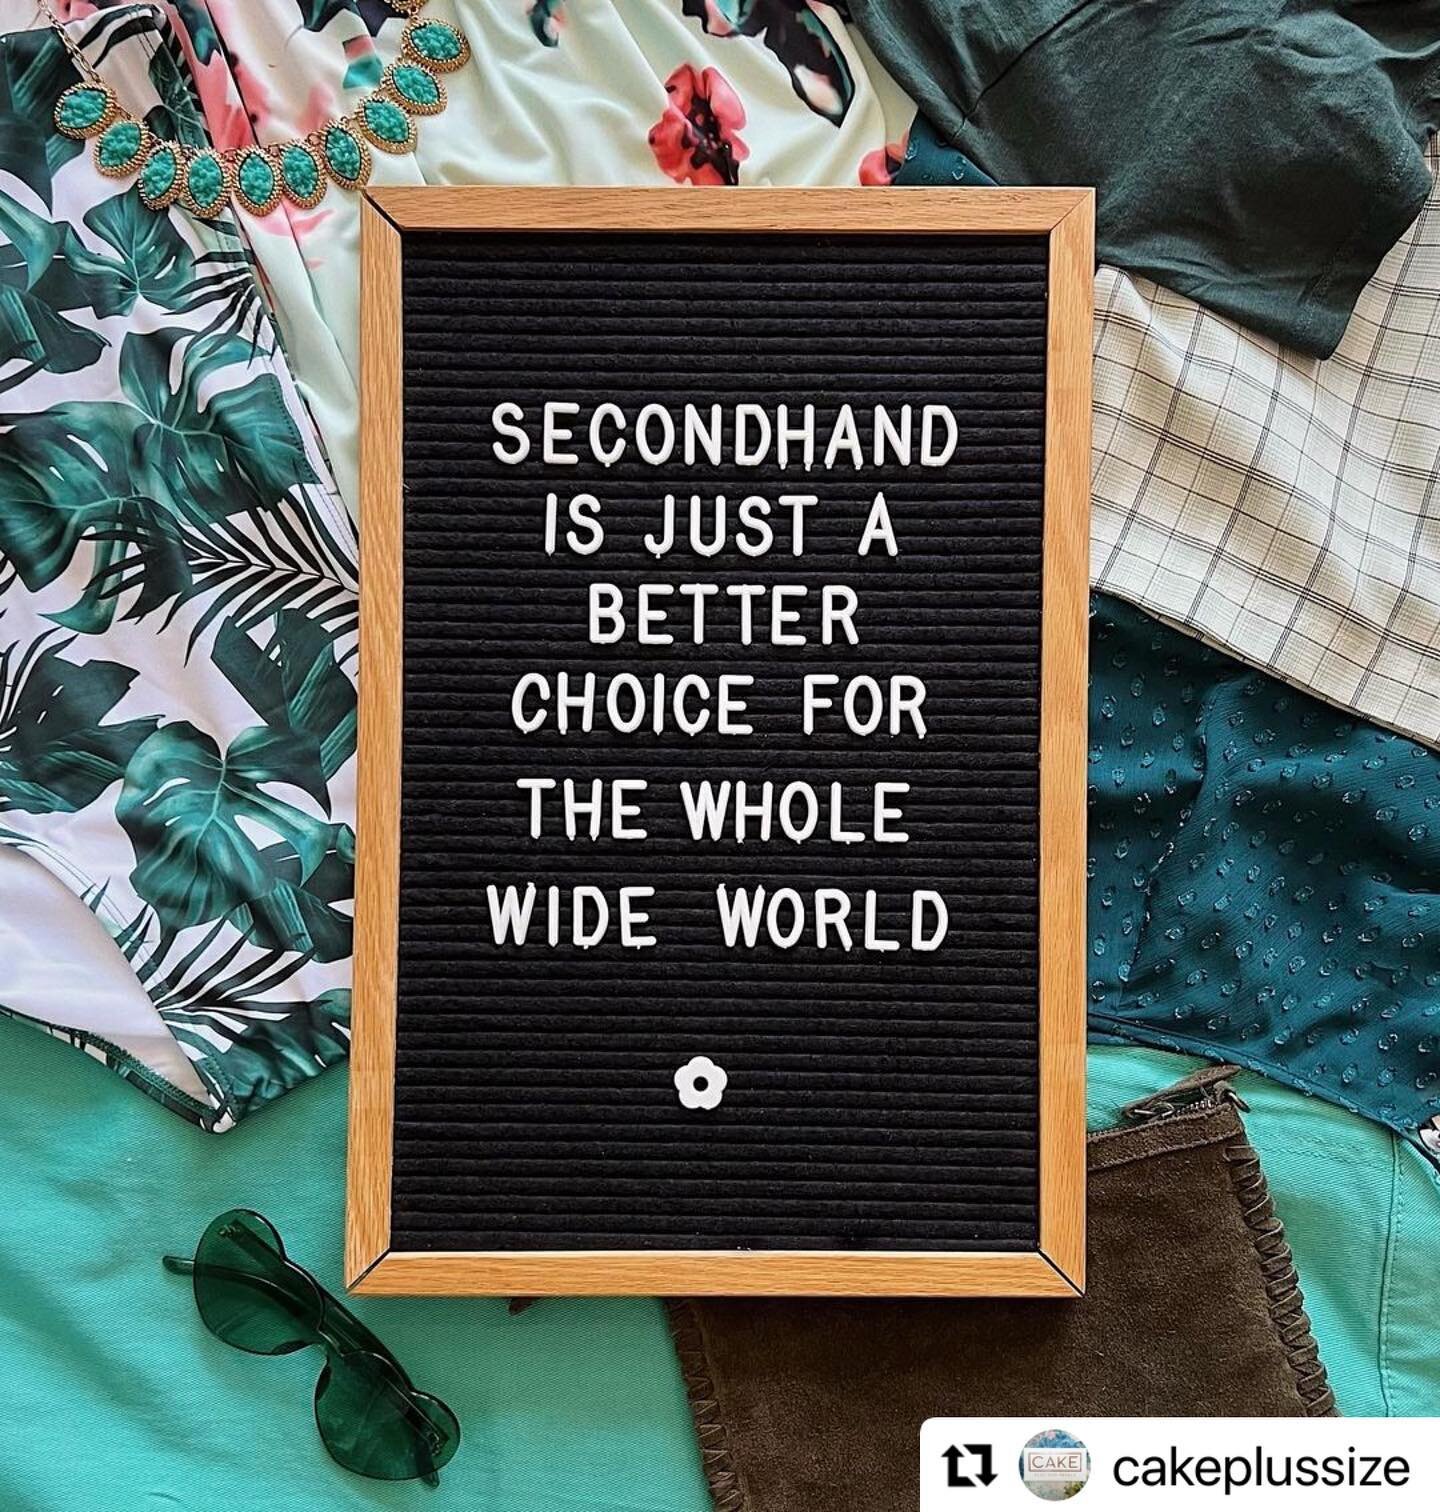 An aspect of my business I&rsquo;m so proud of&hellip; Making resale/thrift/secondhand shopping more possible for fat folks in our little corner of the world. 💕🌍🥰♻️

#Repost @cakeplussize: 
Secondhand is just a better choice for the whole wide wor